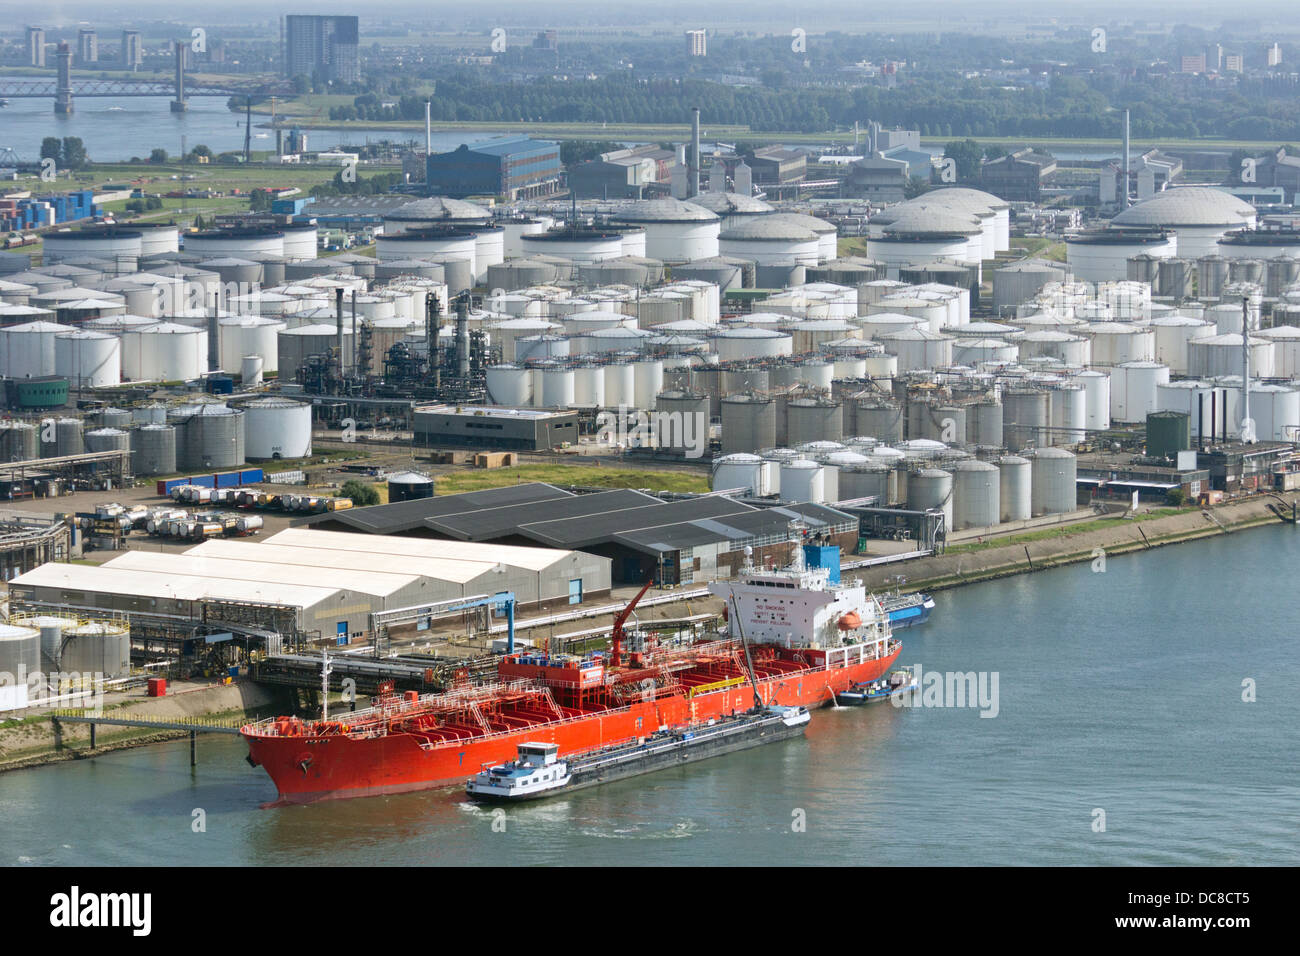 Oil tanker moored at a oil storage terminal Stock Photo